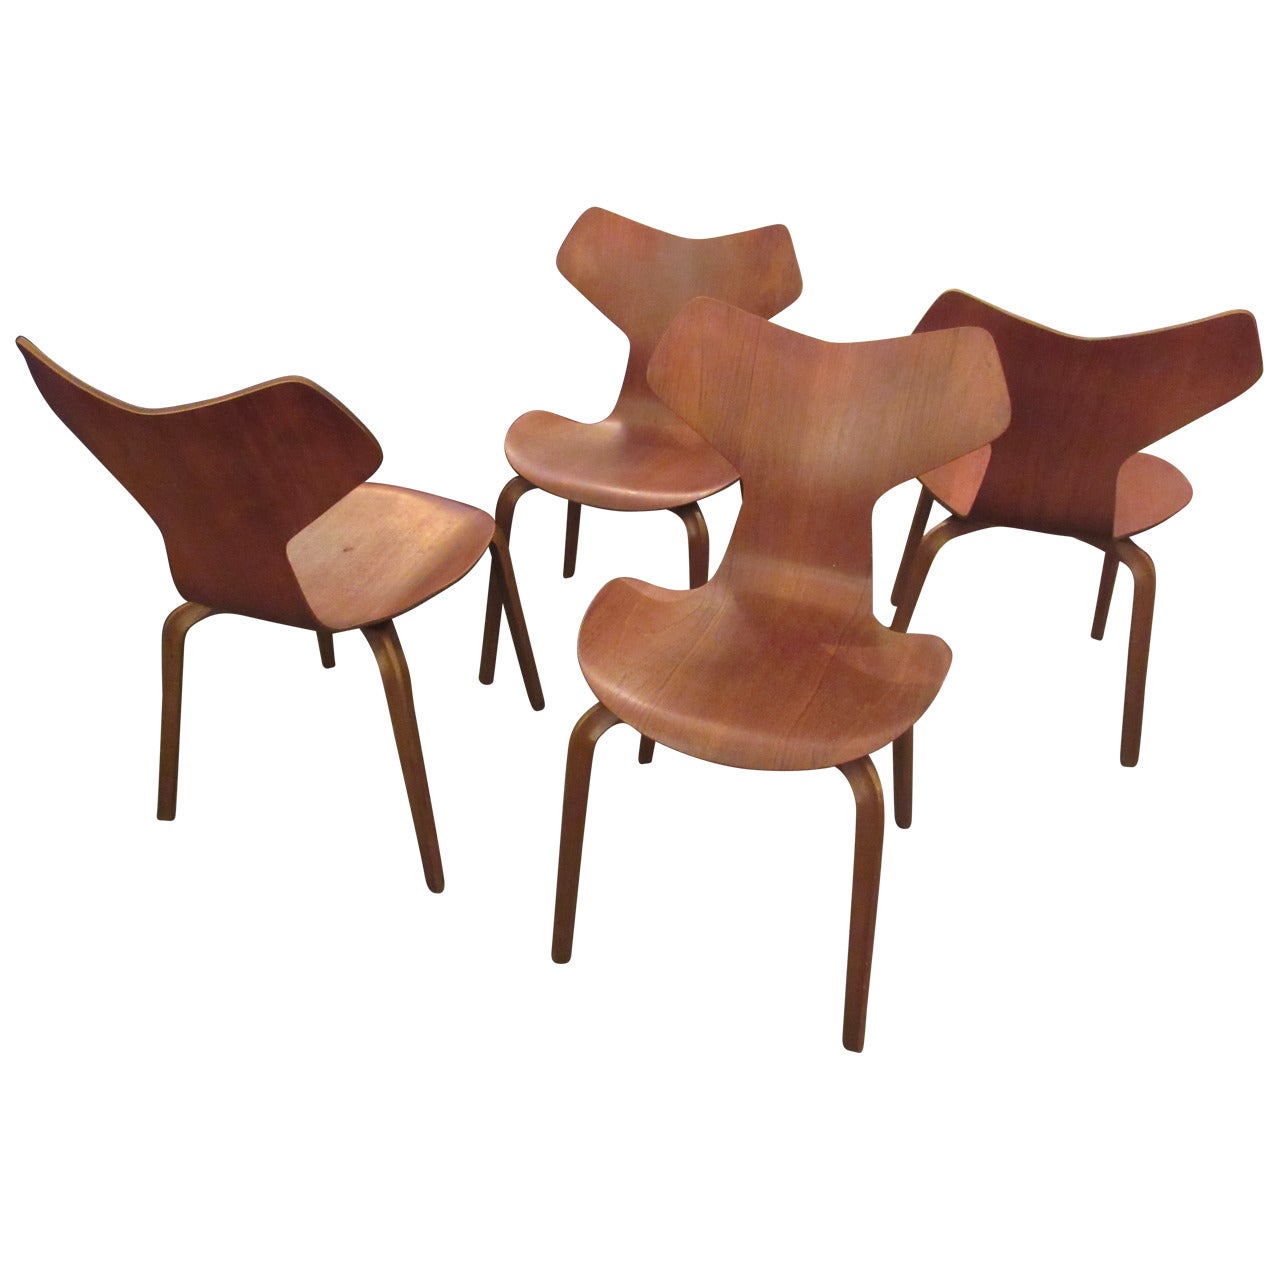 Arne Jacobsen 4130 Stacking Ant Chairs with Wood Legs by Fritz Hansen